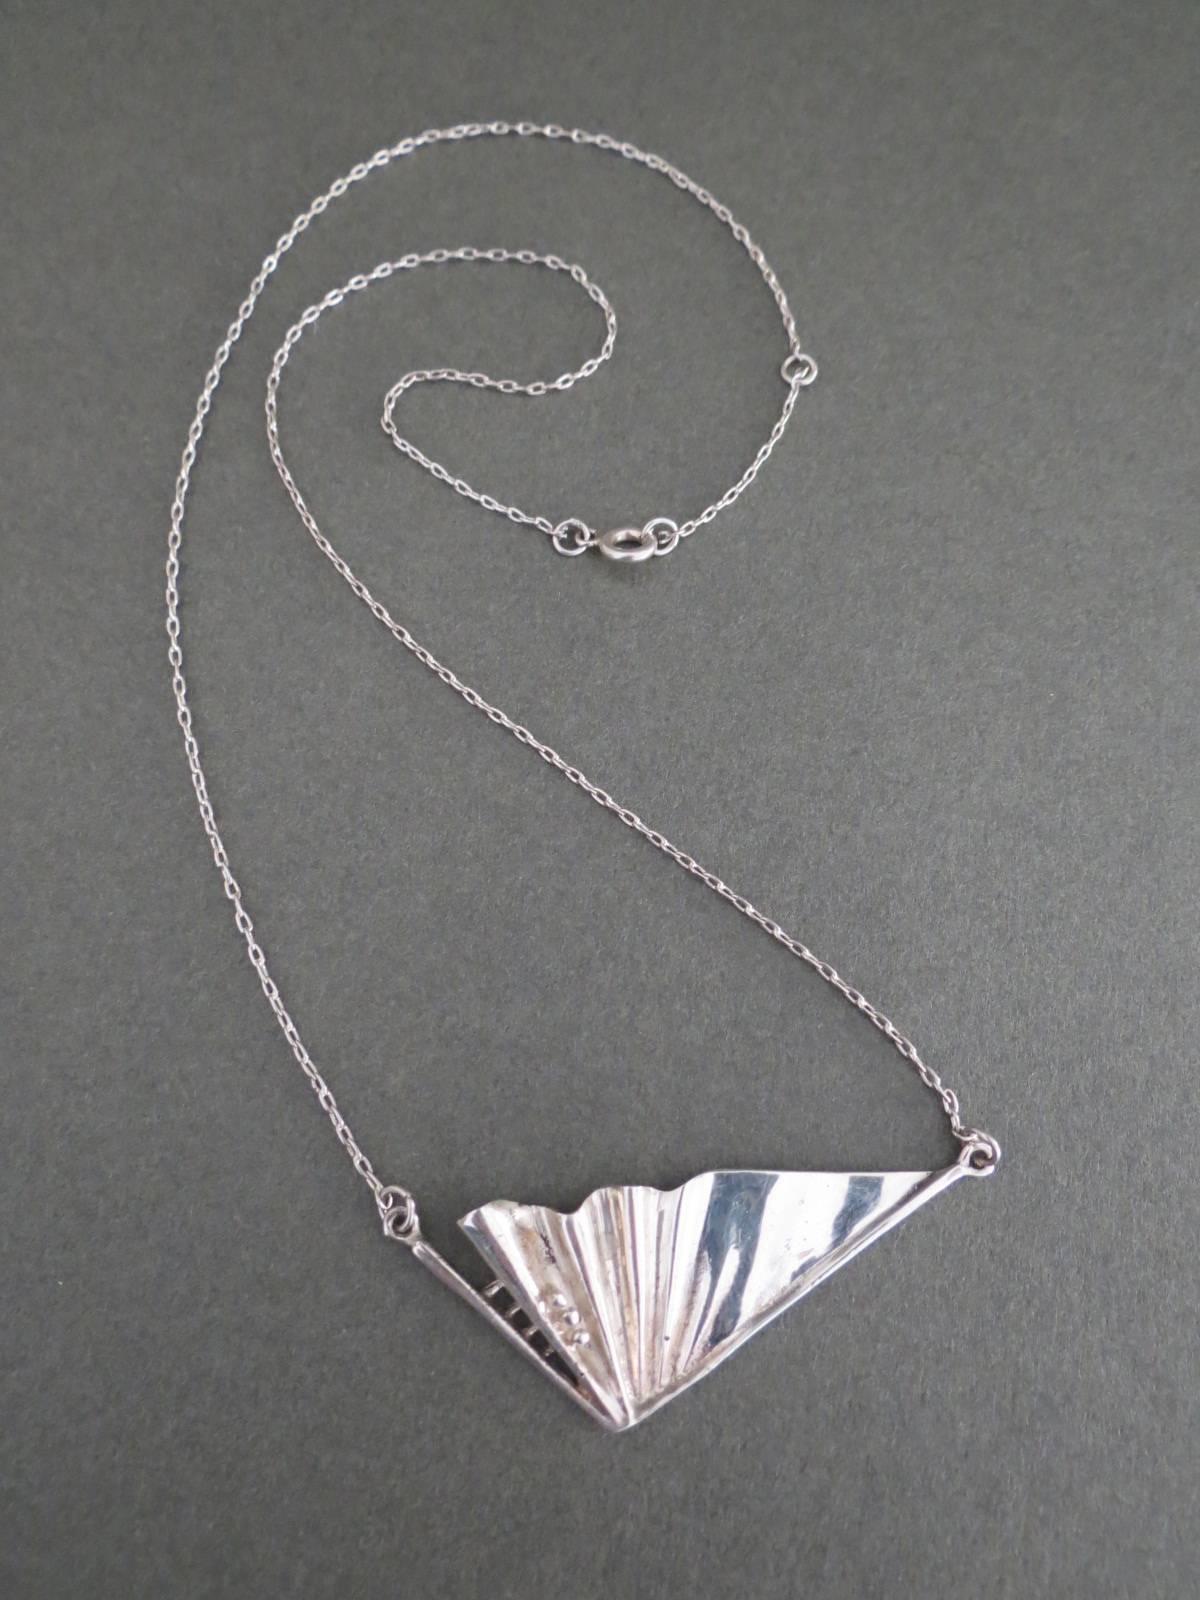 Vintage Danish Mid Century Silver Modernist Necklace. The necklace is hallmarked.
Item Specifics
Length: 52cm (approx 20.50